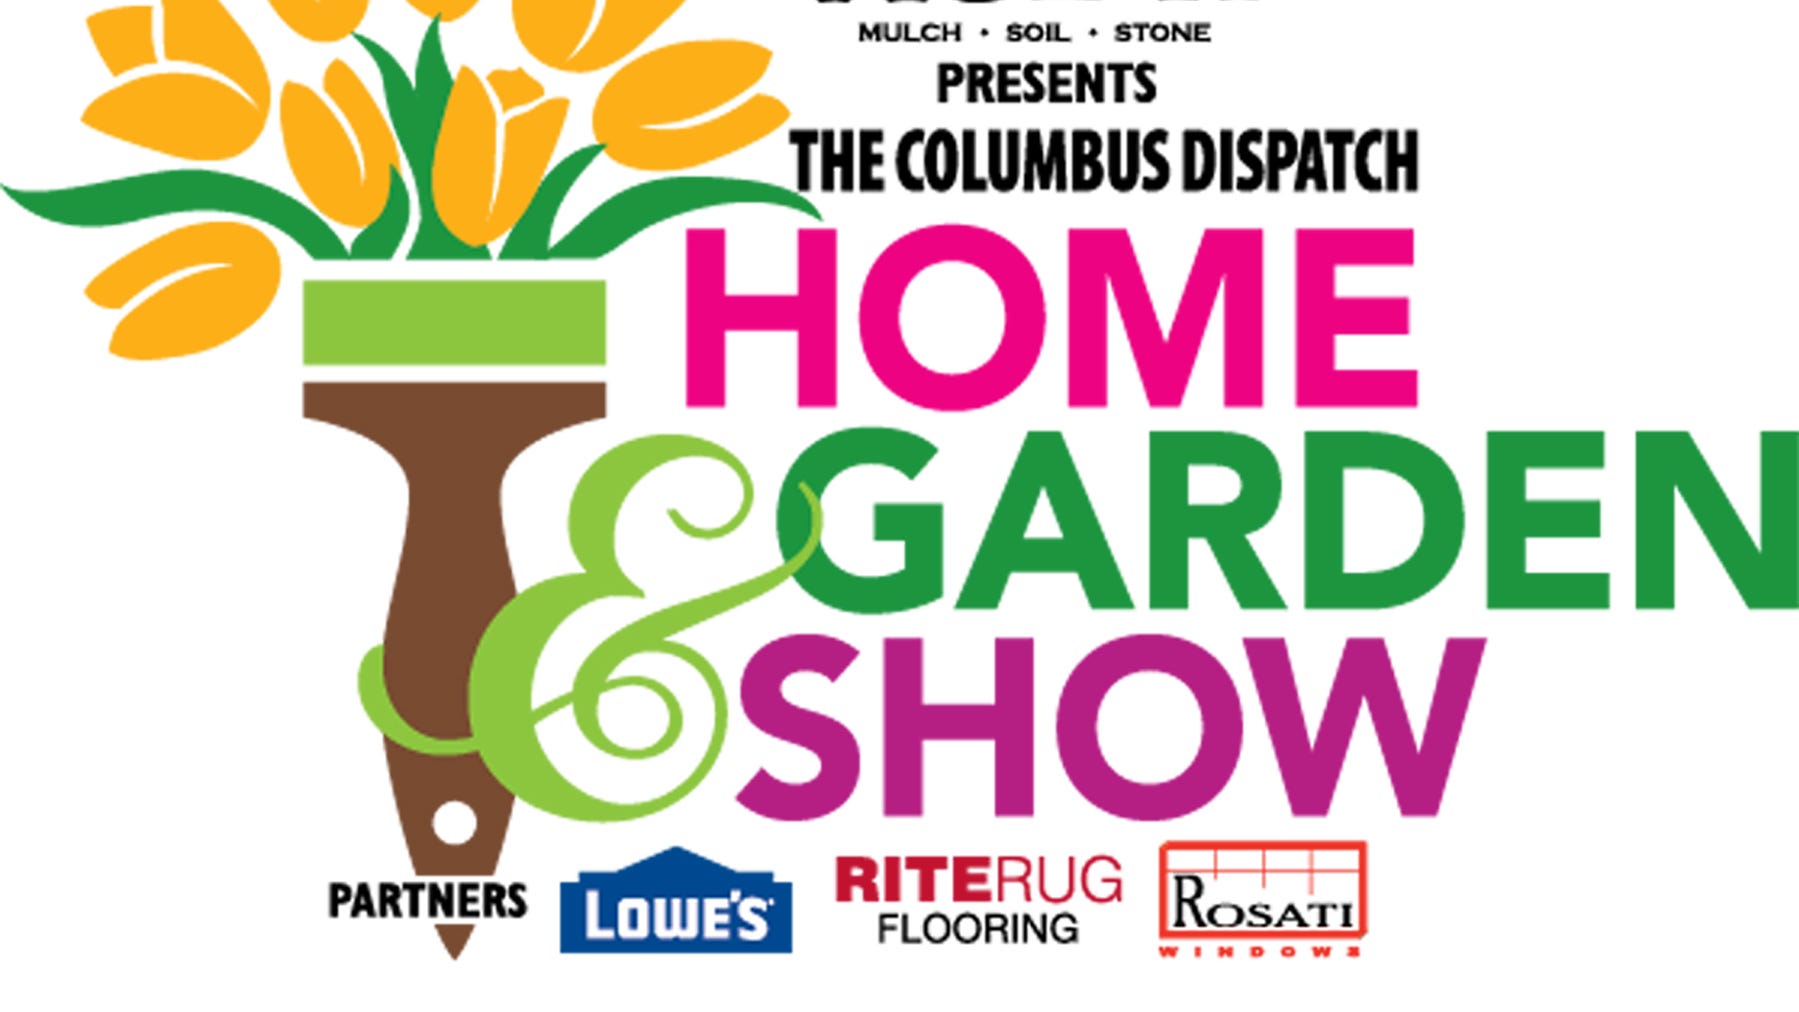 About the Columbus Dispatch Home & Garden Show at Ohio Expo Center